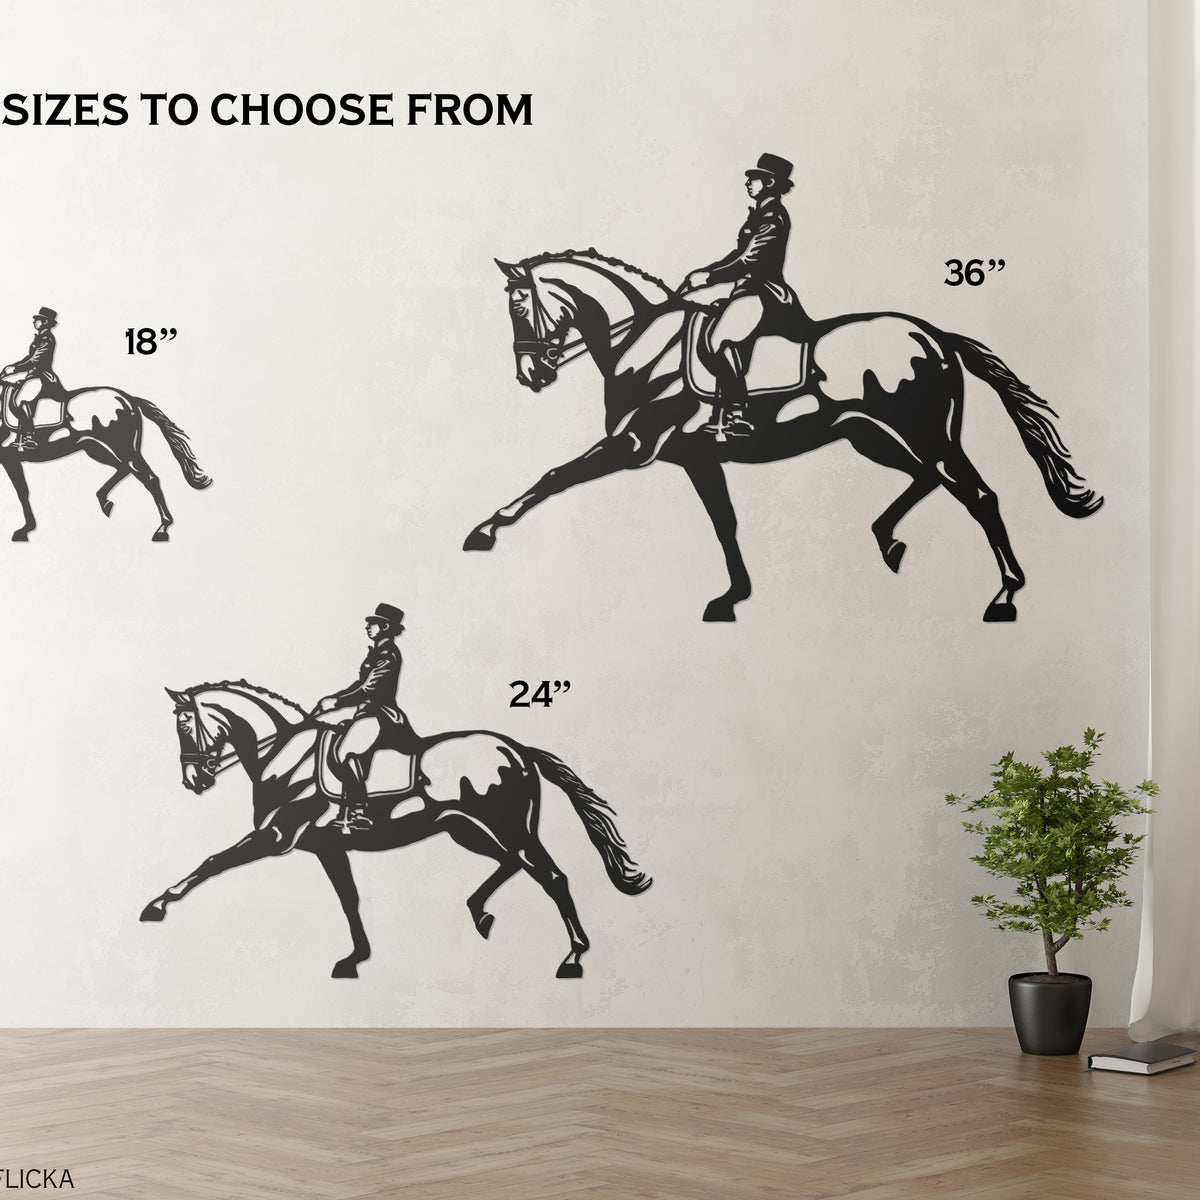 Dressage extended trot wall art sizes